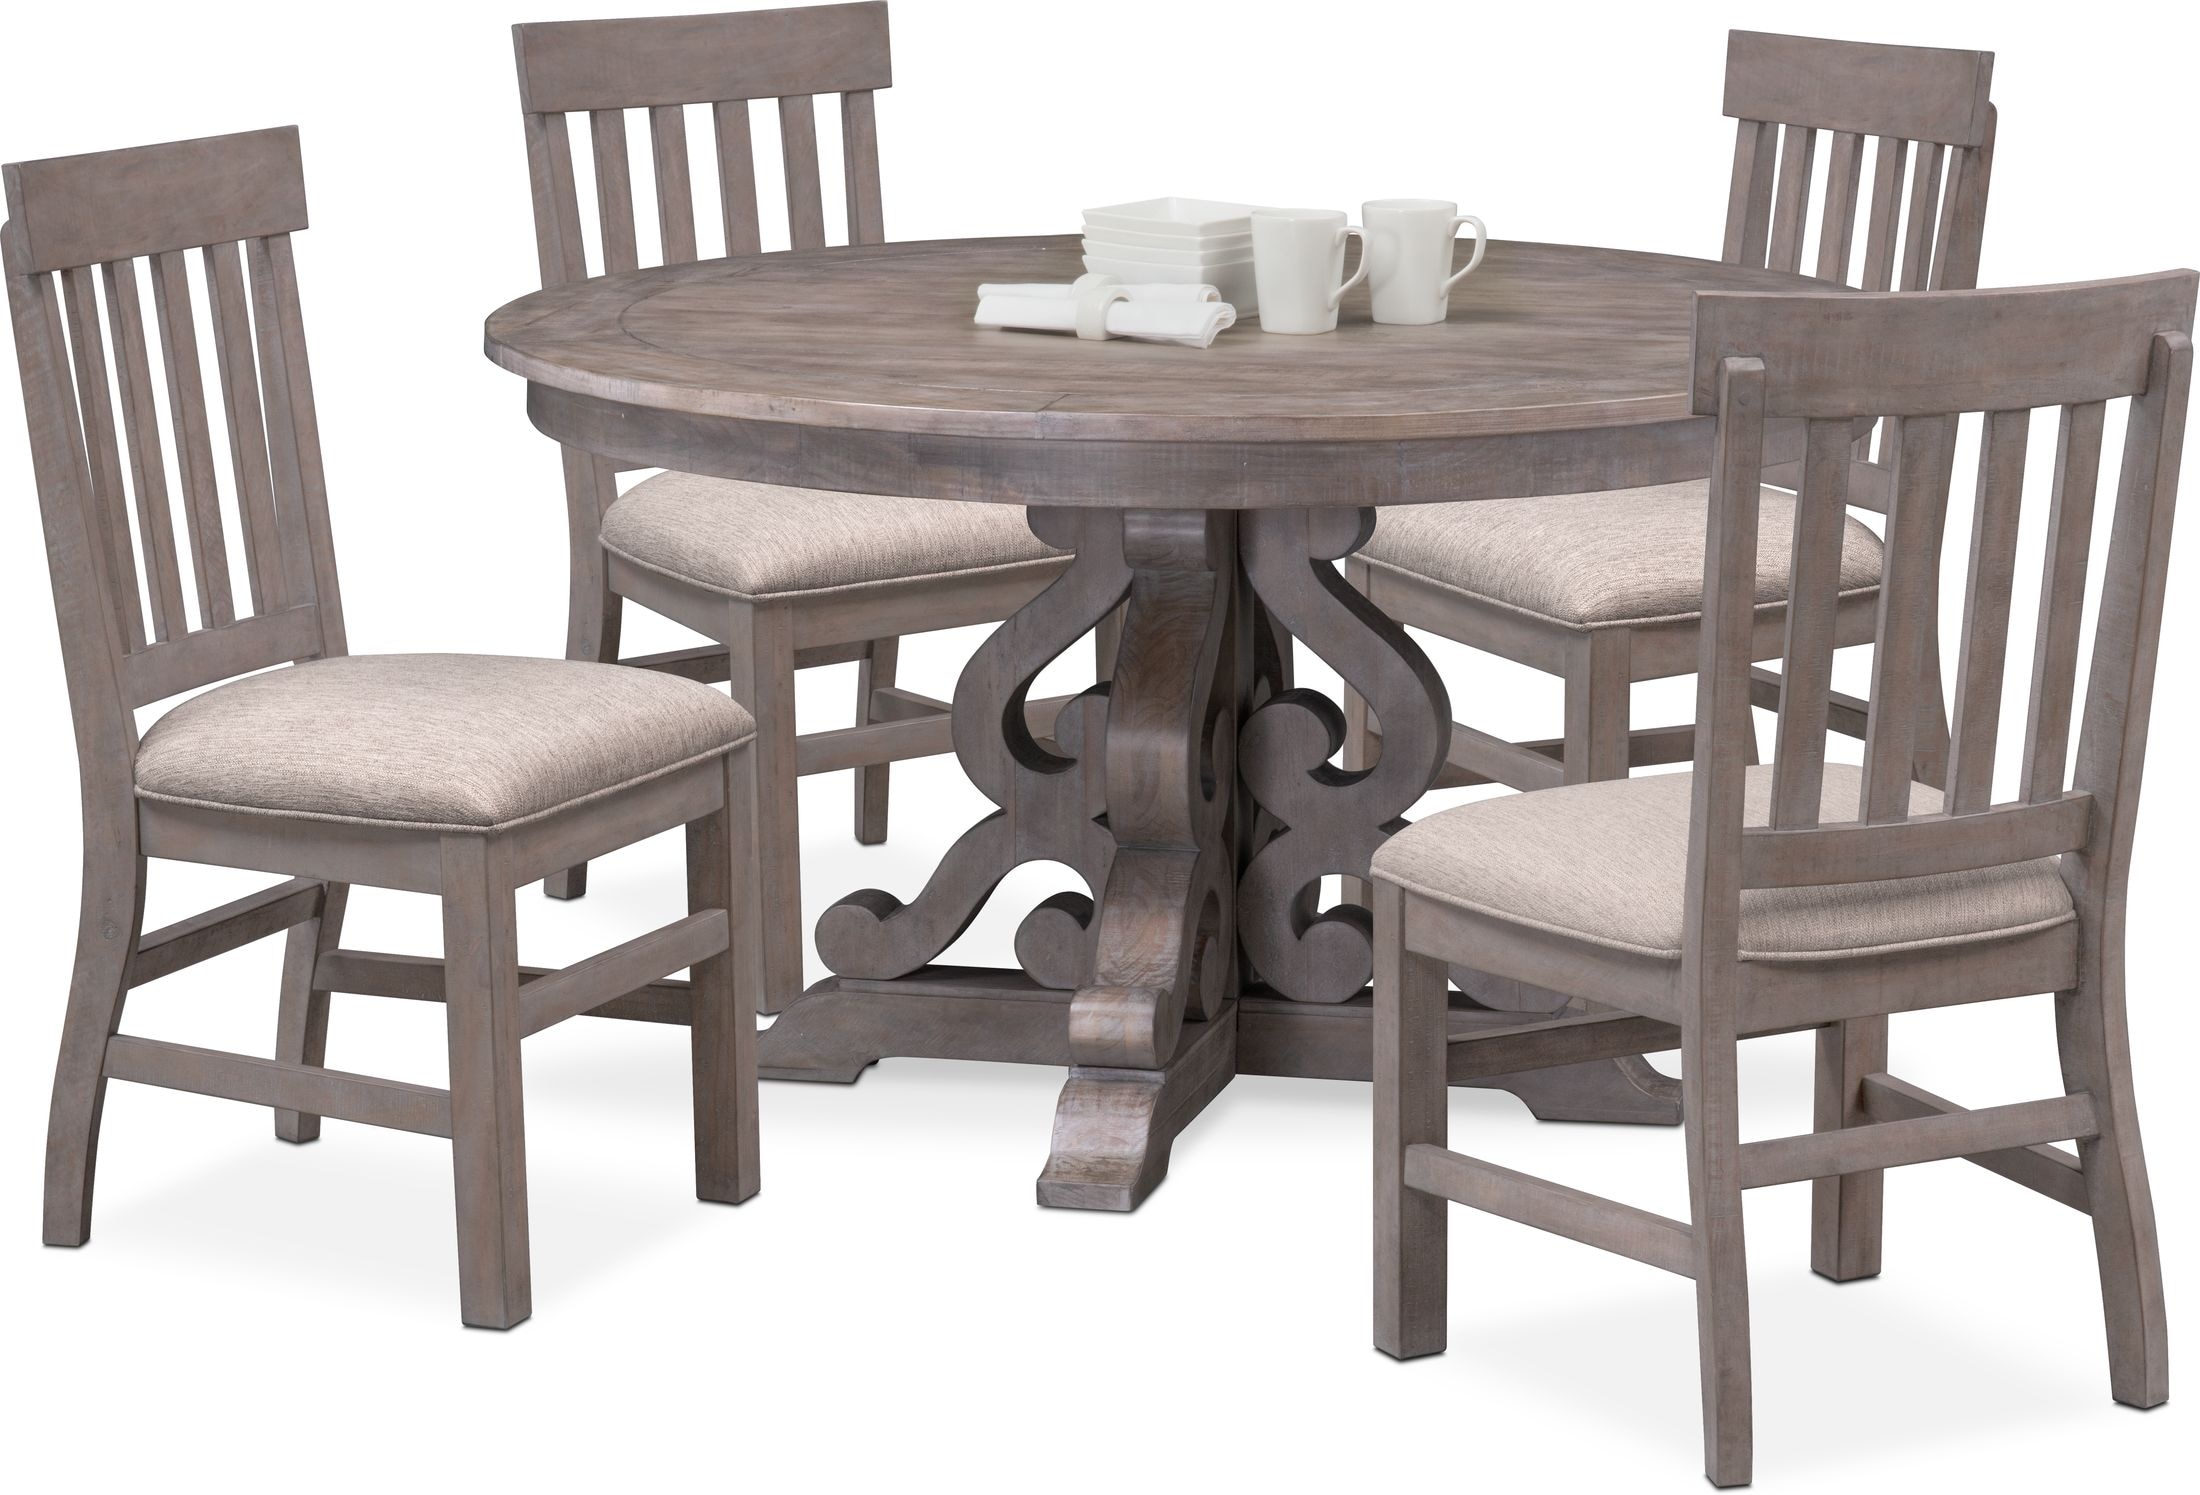 Undefined Value City Furniture, Value City Dining Room Table Chairs